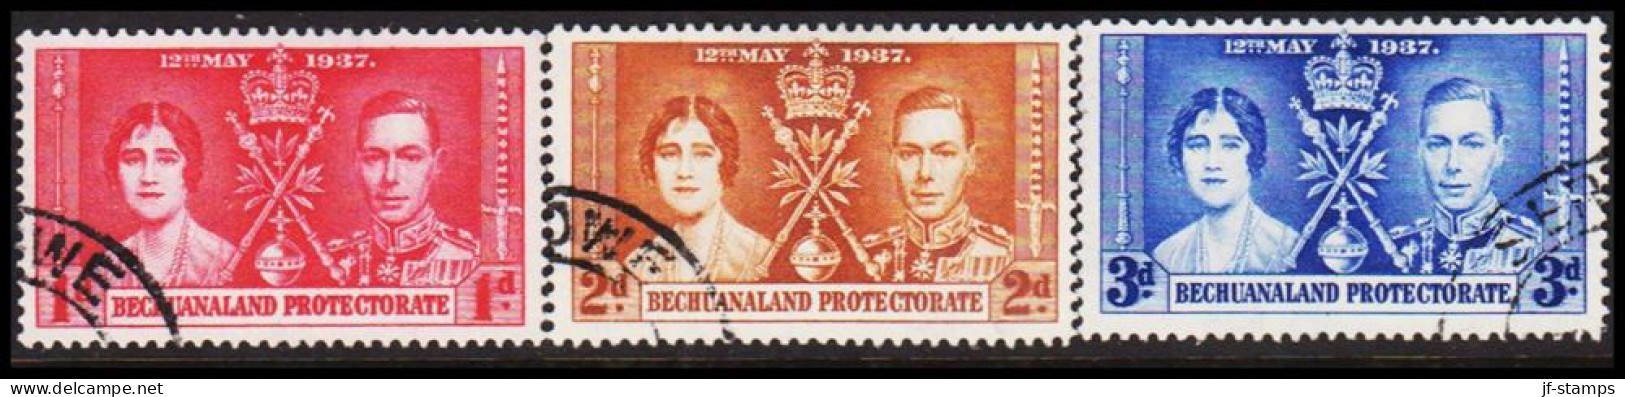 1937. BECHUANALAND. Georg VI Coronation Complete Set.  (MICHEL 98-100) - JF537436 - 1885-1964 Bechuanaland Protectorate